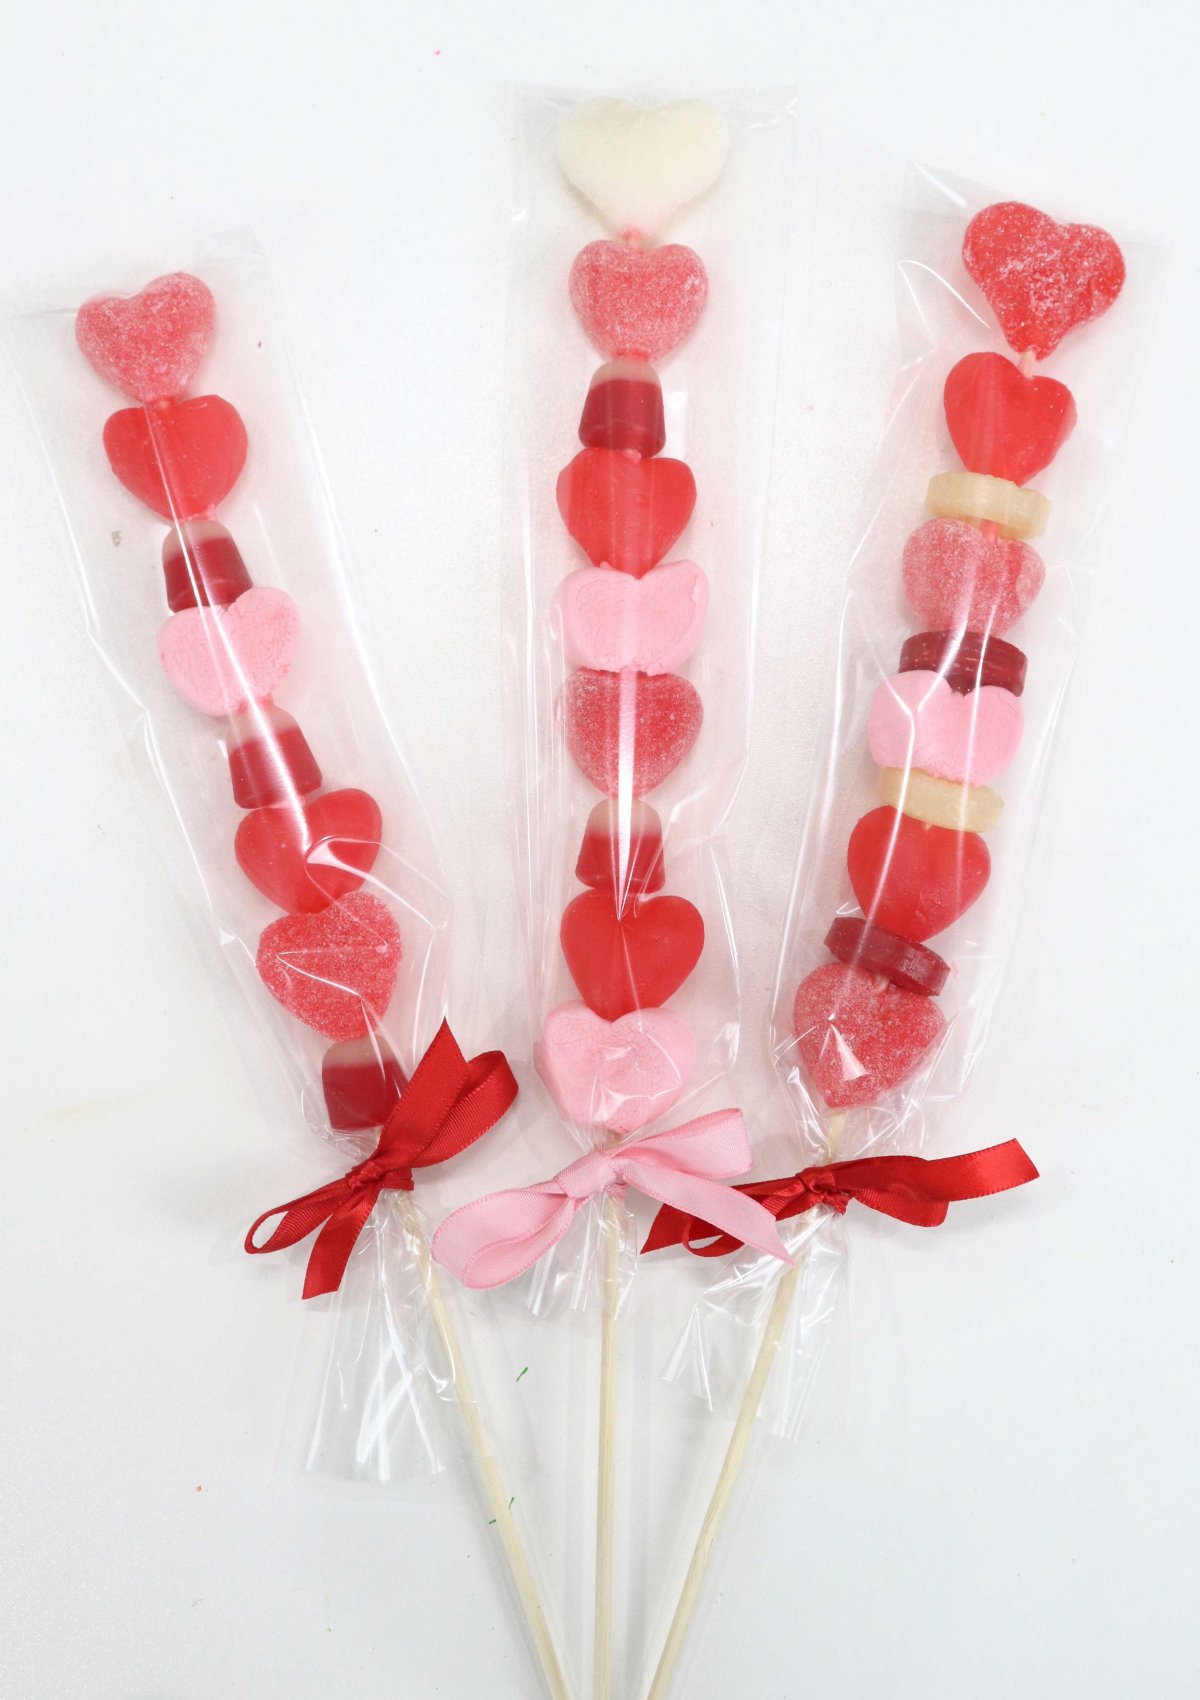 Image contains three candy kabobs with gummy heart candies, marshmallows, and other red, pink, and white candies.